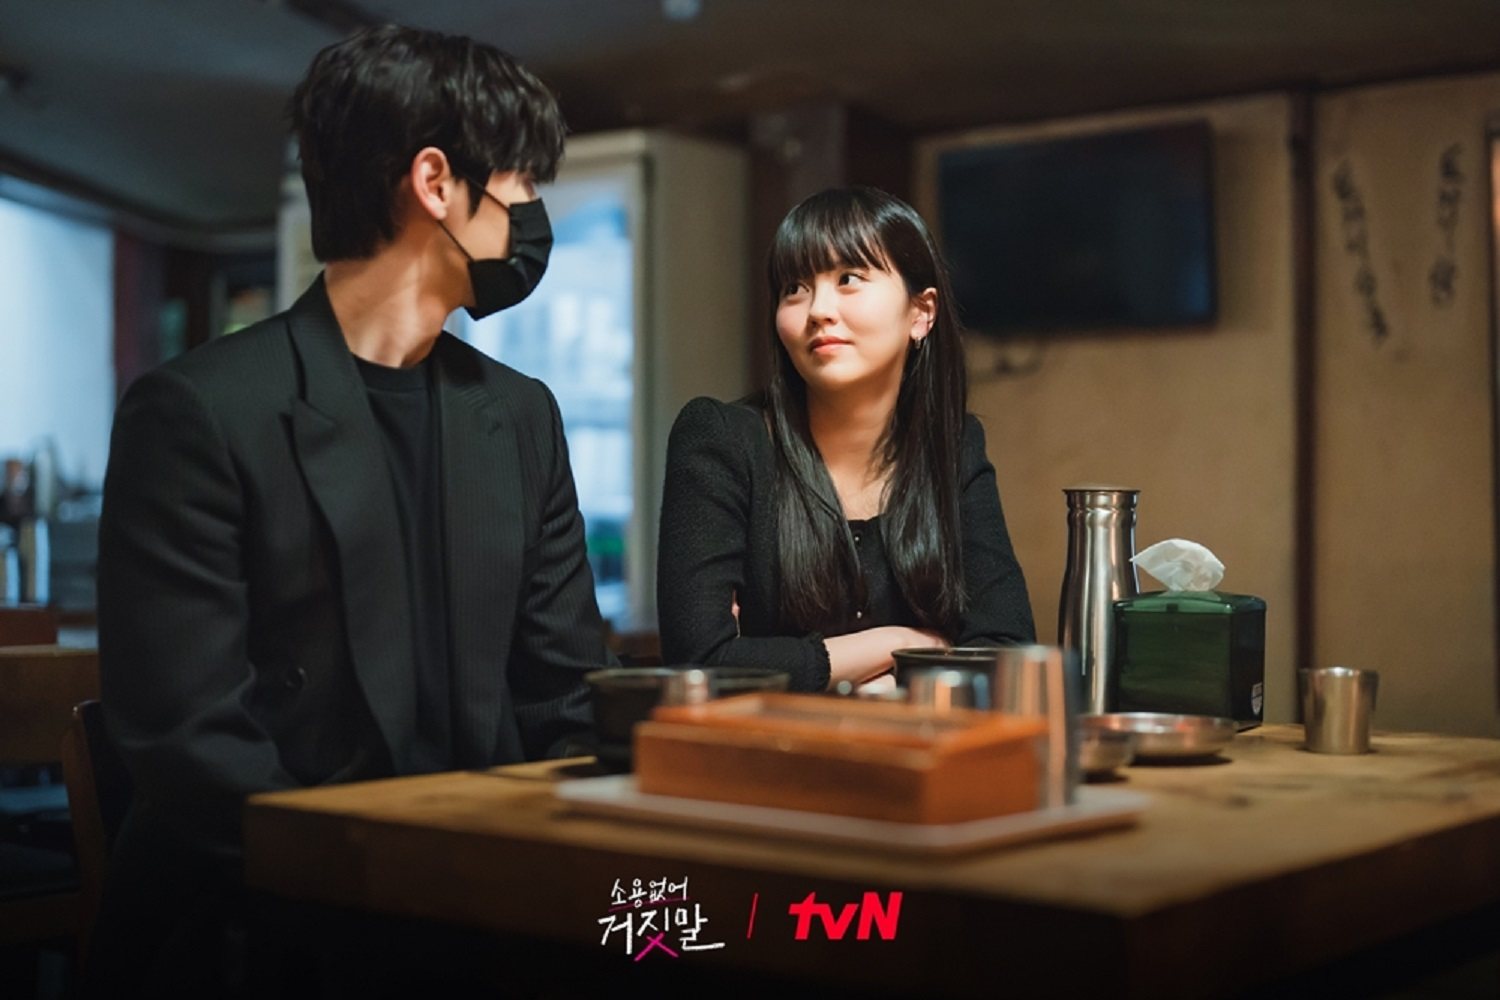 Hwang Min-hyun (left) as publicity-shy songwriter Kim Do-ha and Kim So-hyun as Mok Sol-hee, known as the Liar Hunter for her ability to tell if someone answers a question truthfully or not, in a still from K-drama series “My Lovely Liar”.